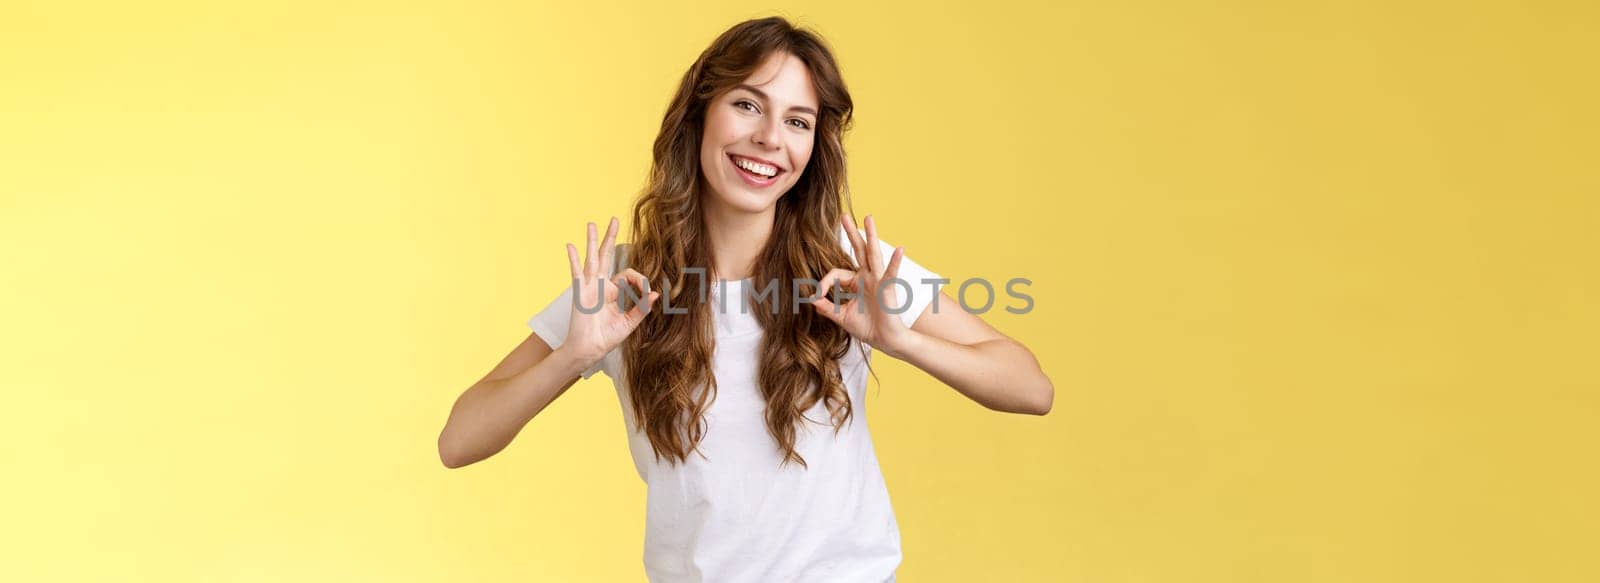 Fine choice have my approval. Satisfied cheerful good-looking european woman long chestnut haircut show okay ok satisfactory gesture tilt head amused smiling broadly agree like good job by Benzoix